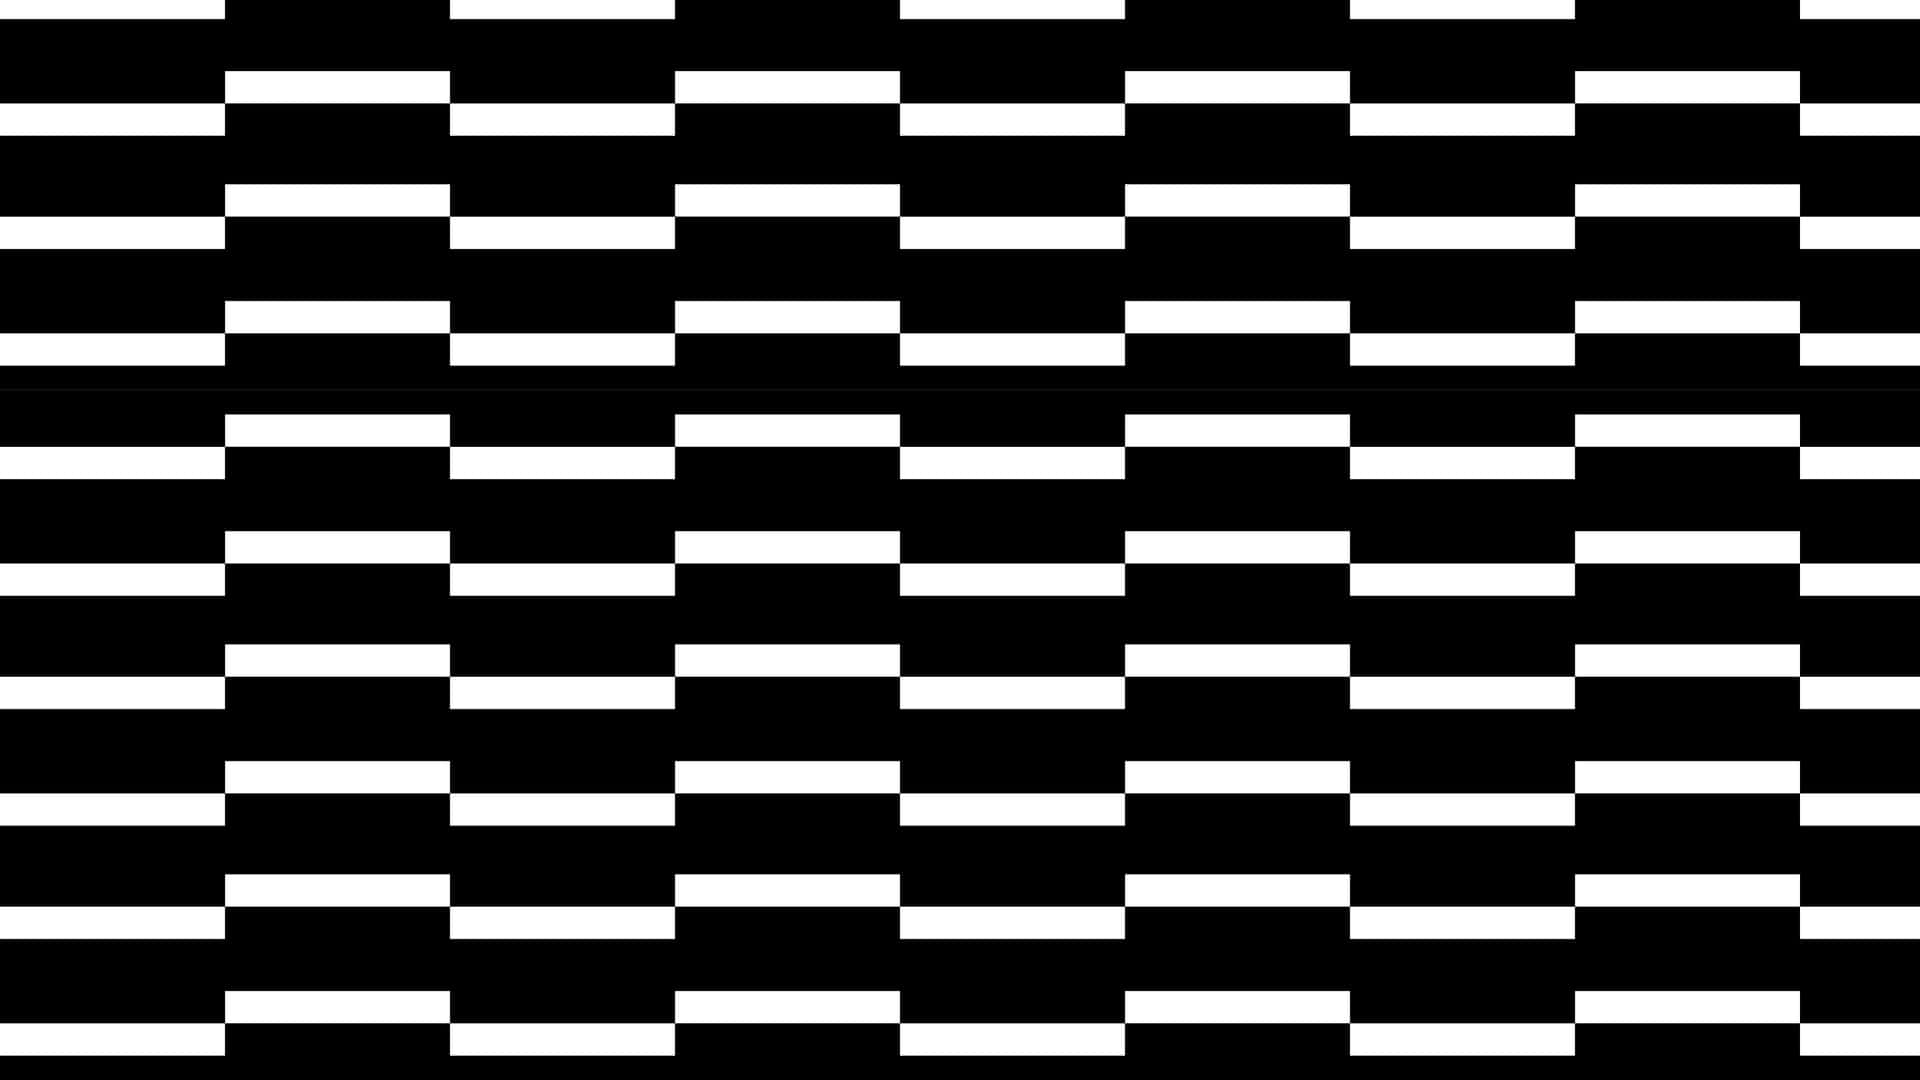 Abstract black and white striped background